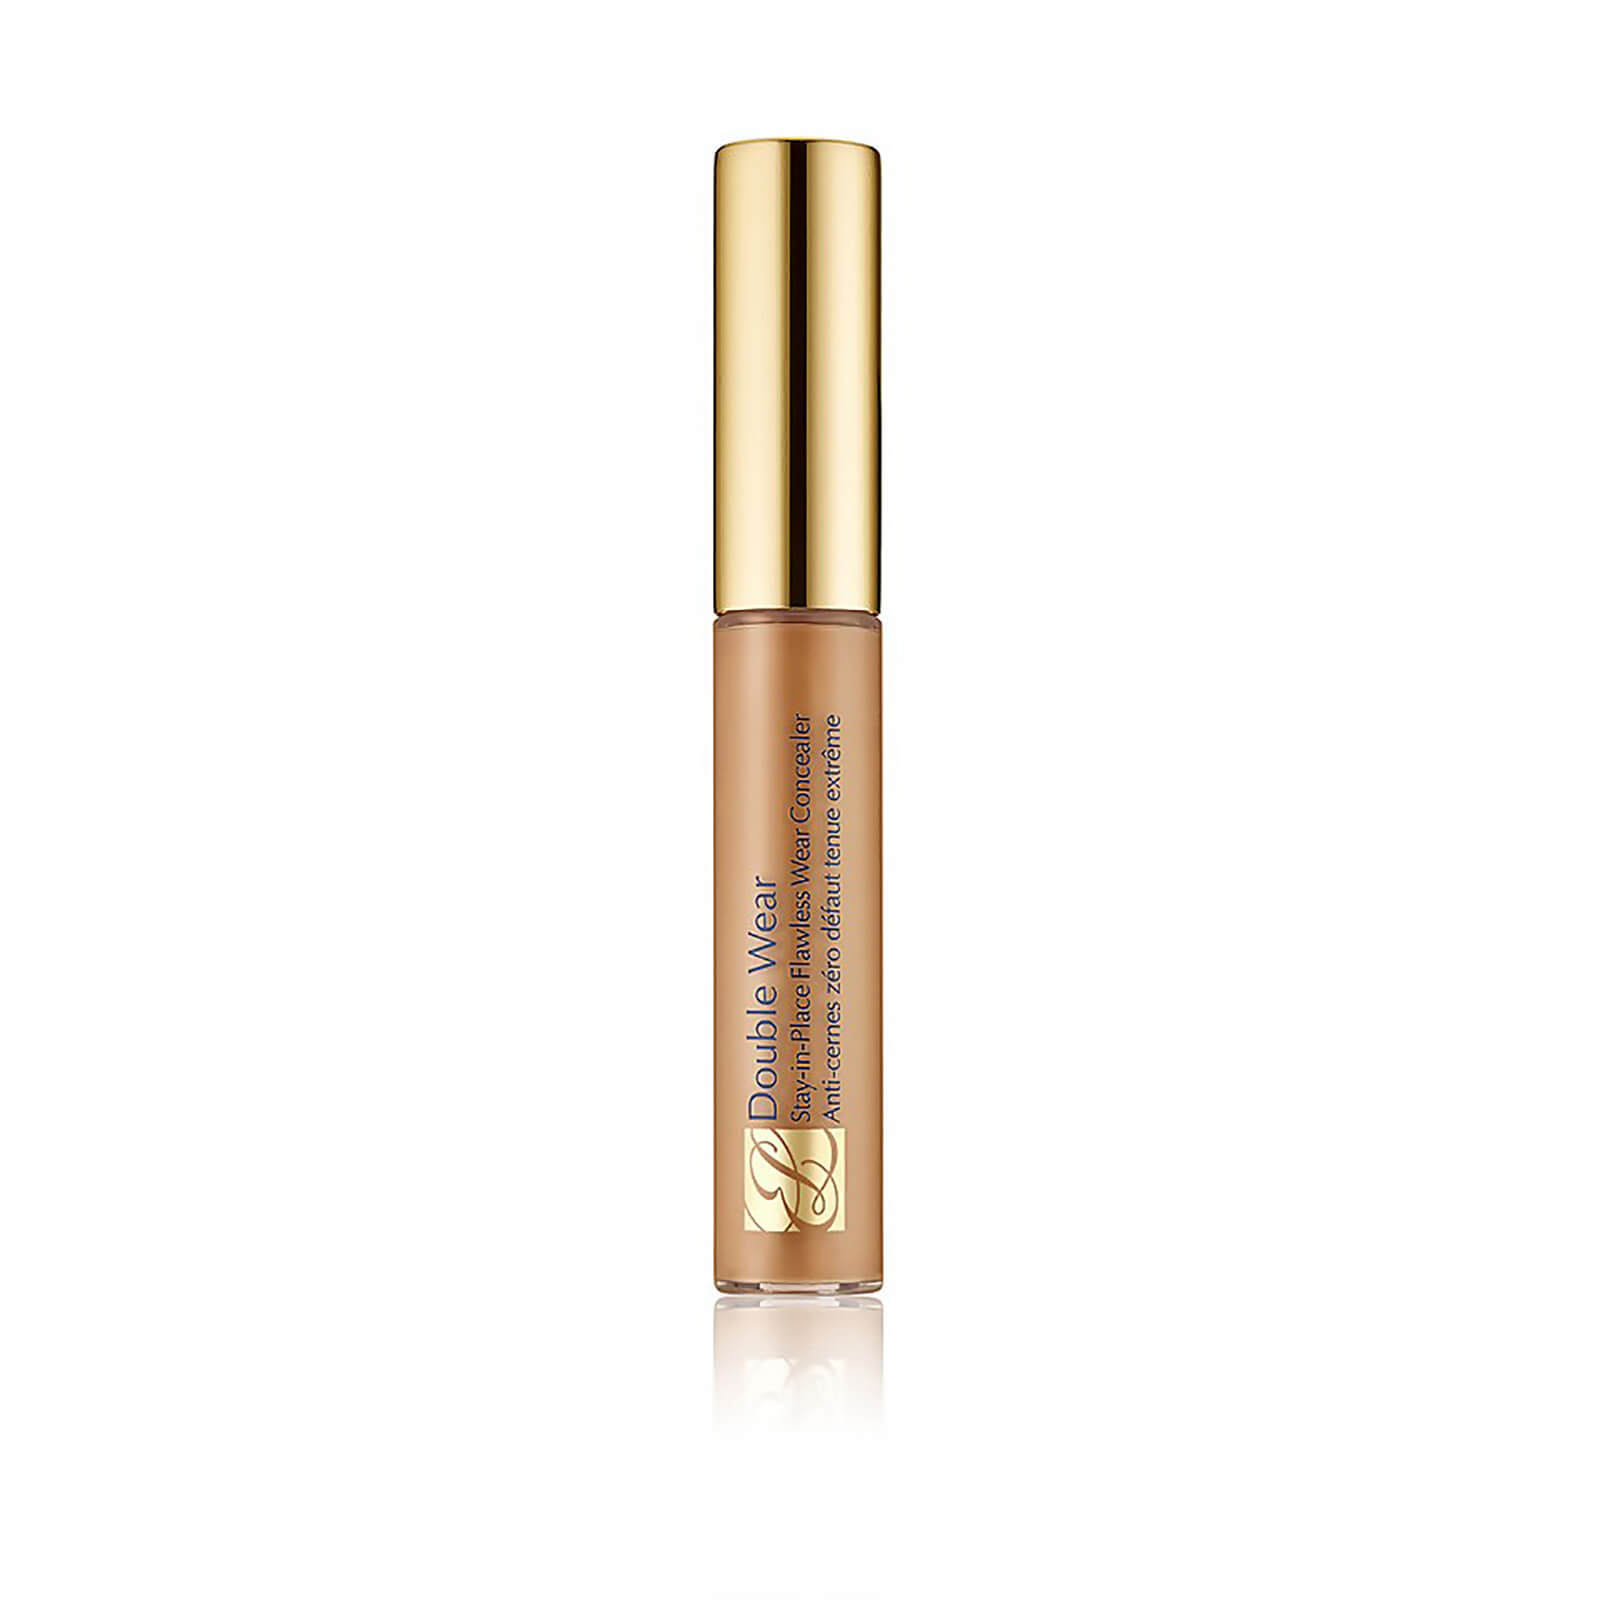 Estee Lauder Double Wear Stay-in-Place Flawless Wear Concealer 7ml (Various Shades) - 4W Medium Deep